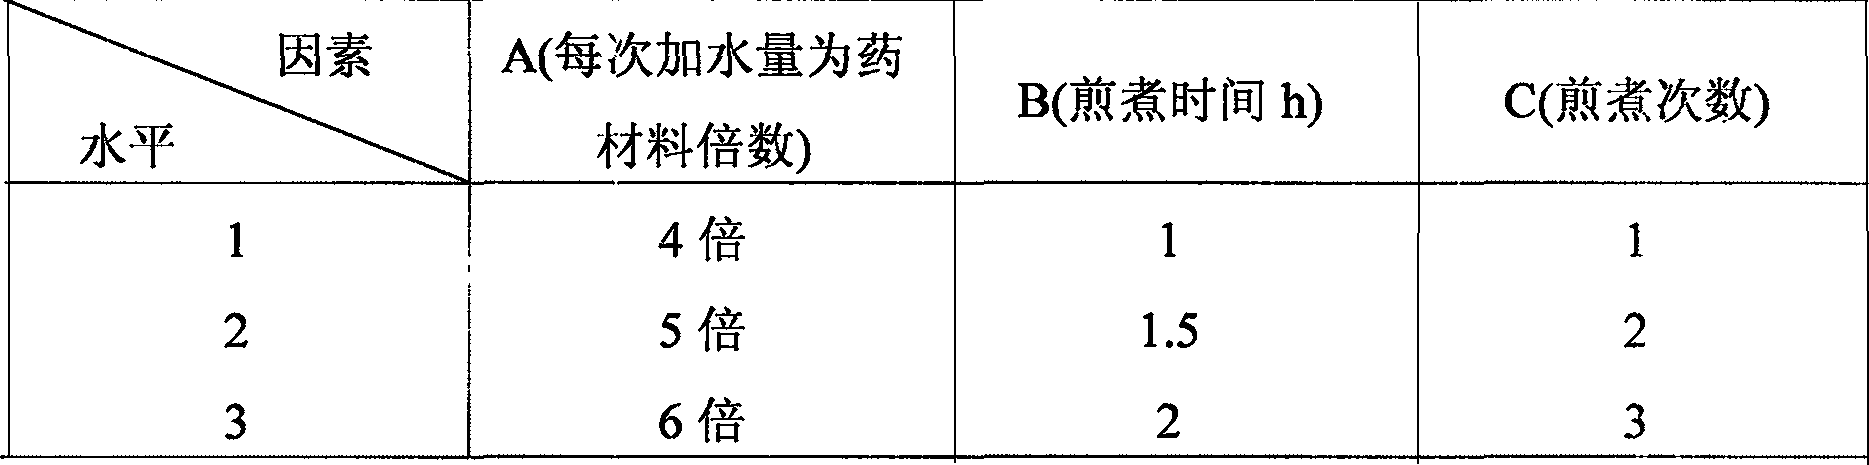 Composition of Chinese traditional medicine for treating alcoholic hepatitis, and preparation method